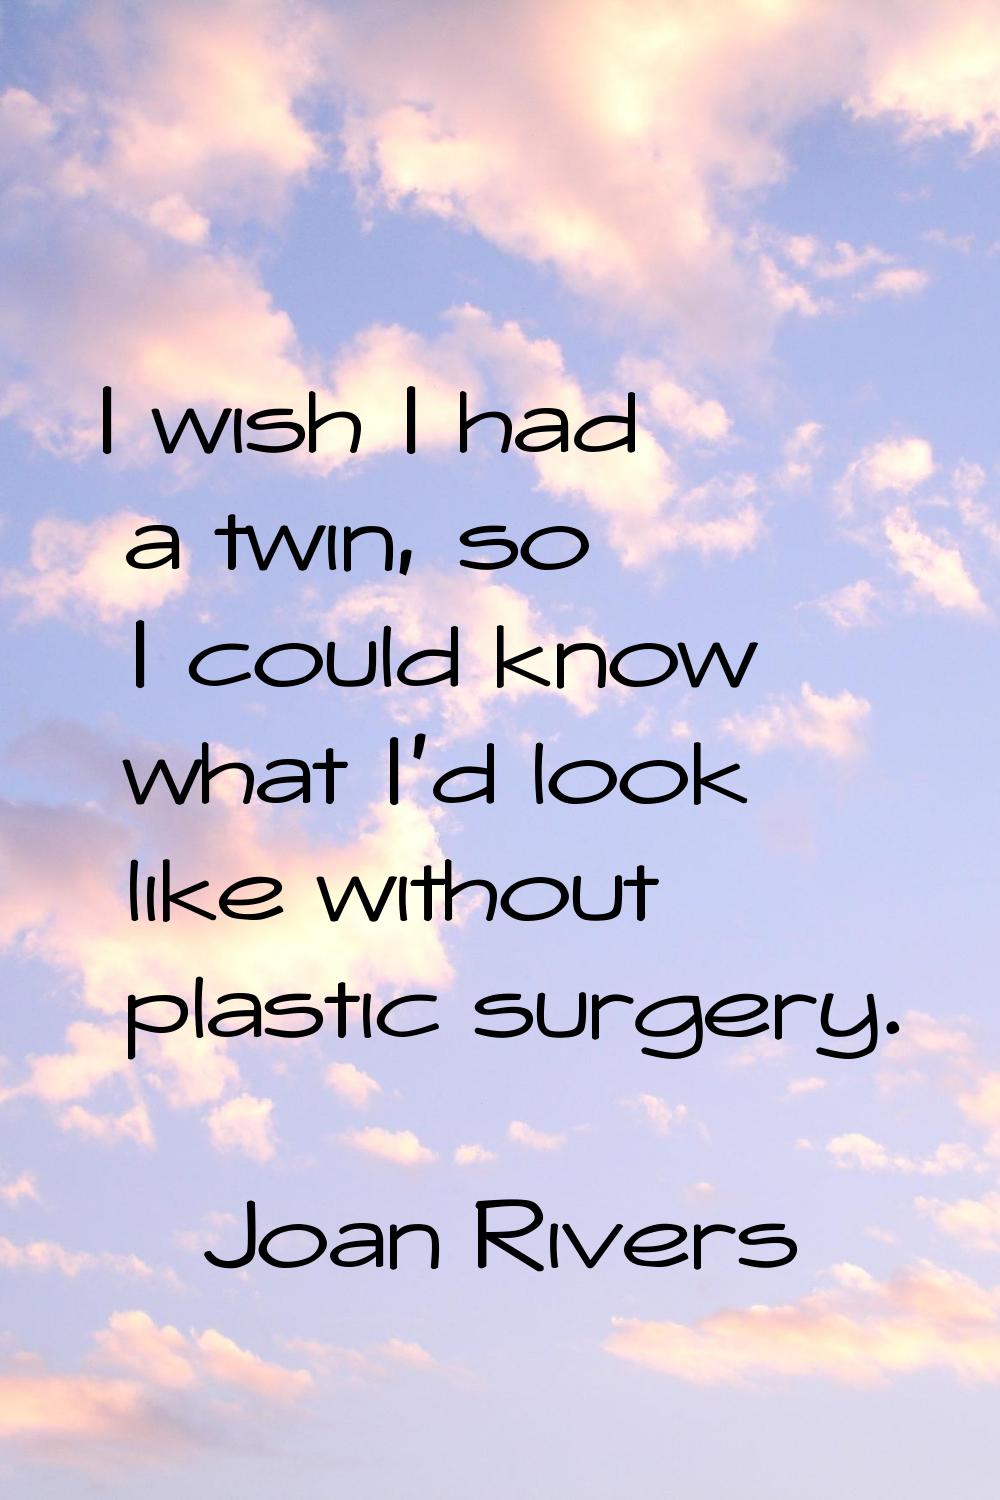 I wish I had a twin, so I could know what I'd look like without plastic surgery.